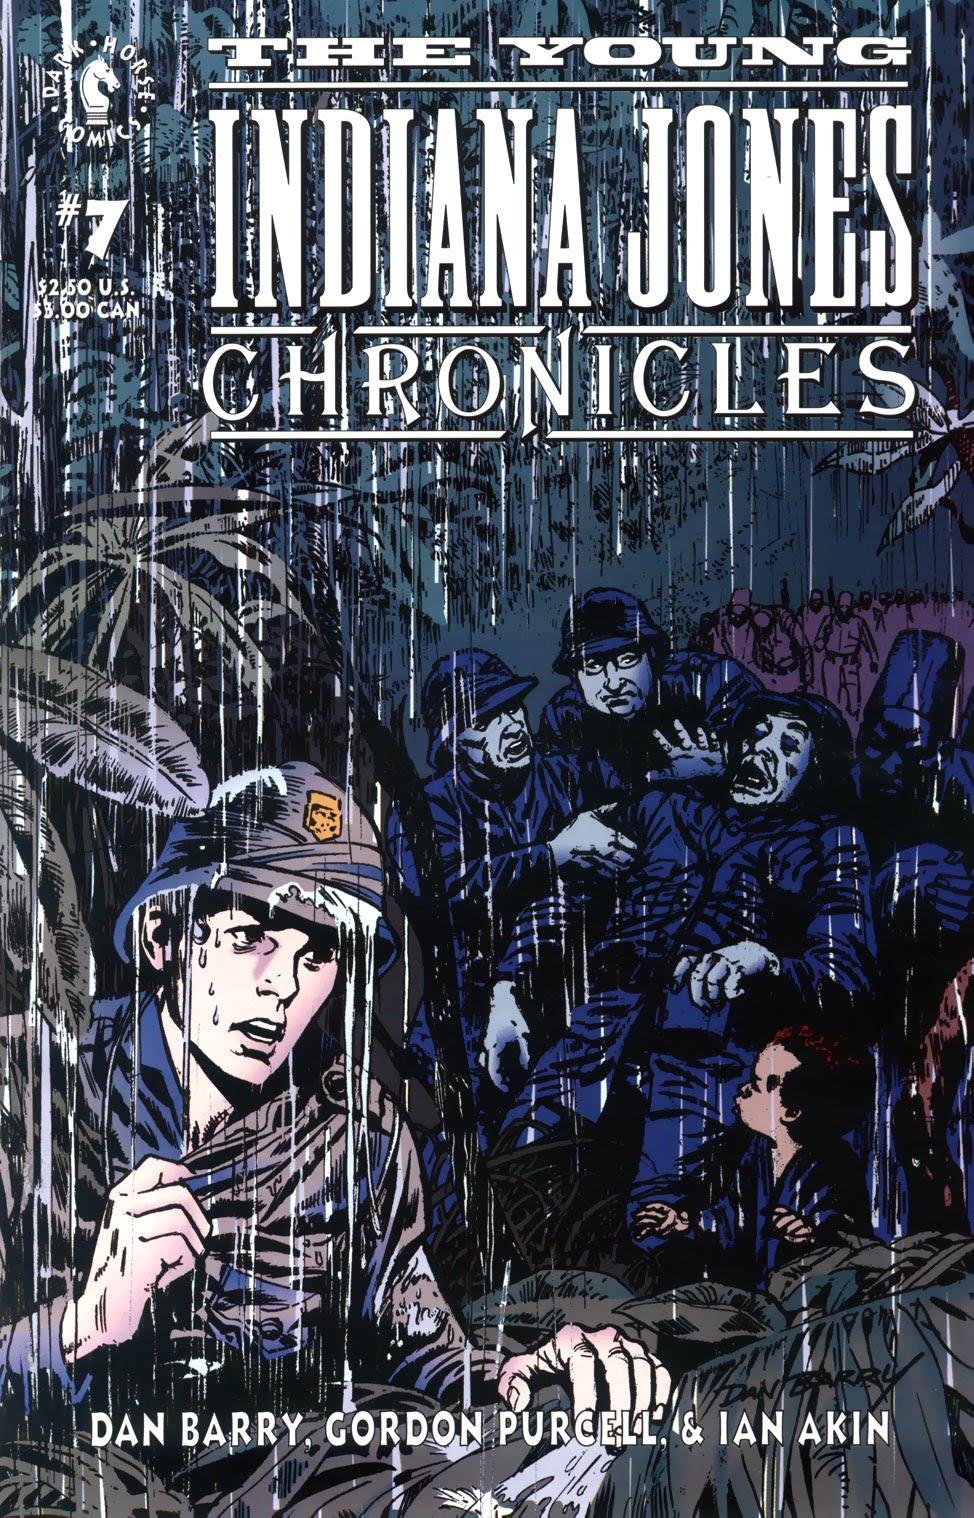 Read online Young Indiana Jones Chronicles comic -  Issue #7 - 1